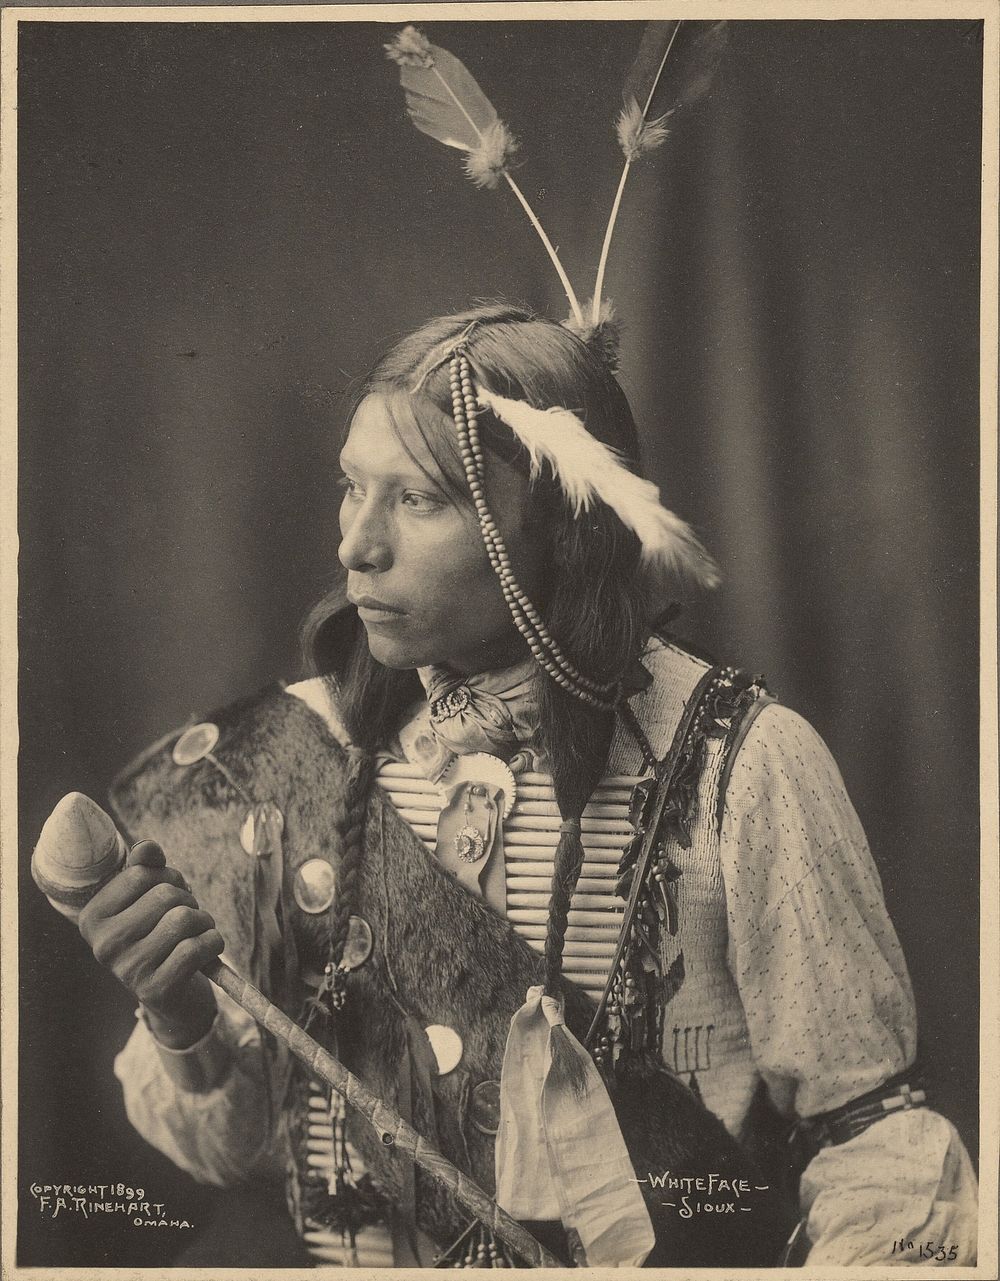 White Face, Sioux by Adolph F Muhr and Frank A Rinehart